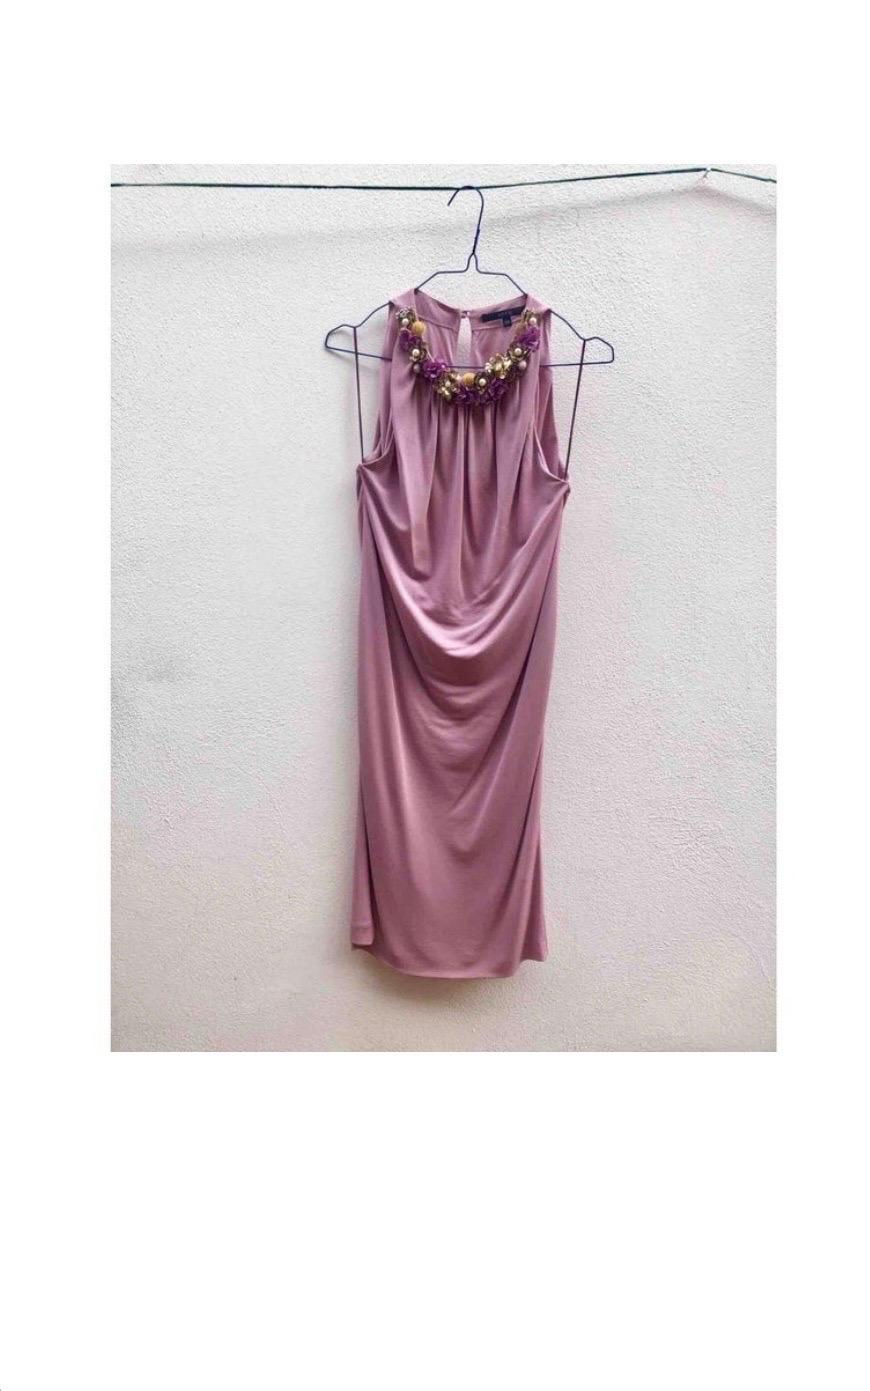 Gucci Dress.
In pink viscose.
Featuring a floral necklace made by sequins and pearls. Back closure throughout buttons.
International XS
Bust 46 cm
Waist 44 cm
Length 100 cm